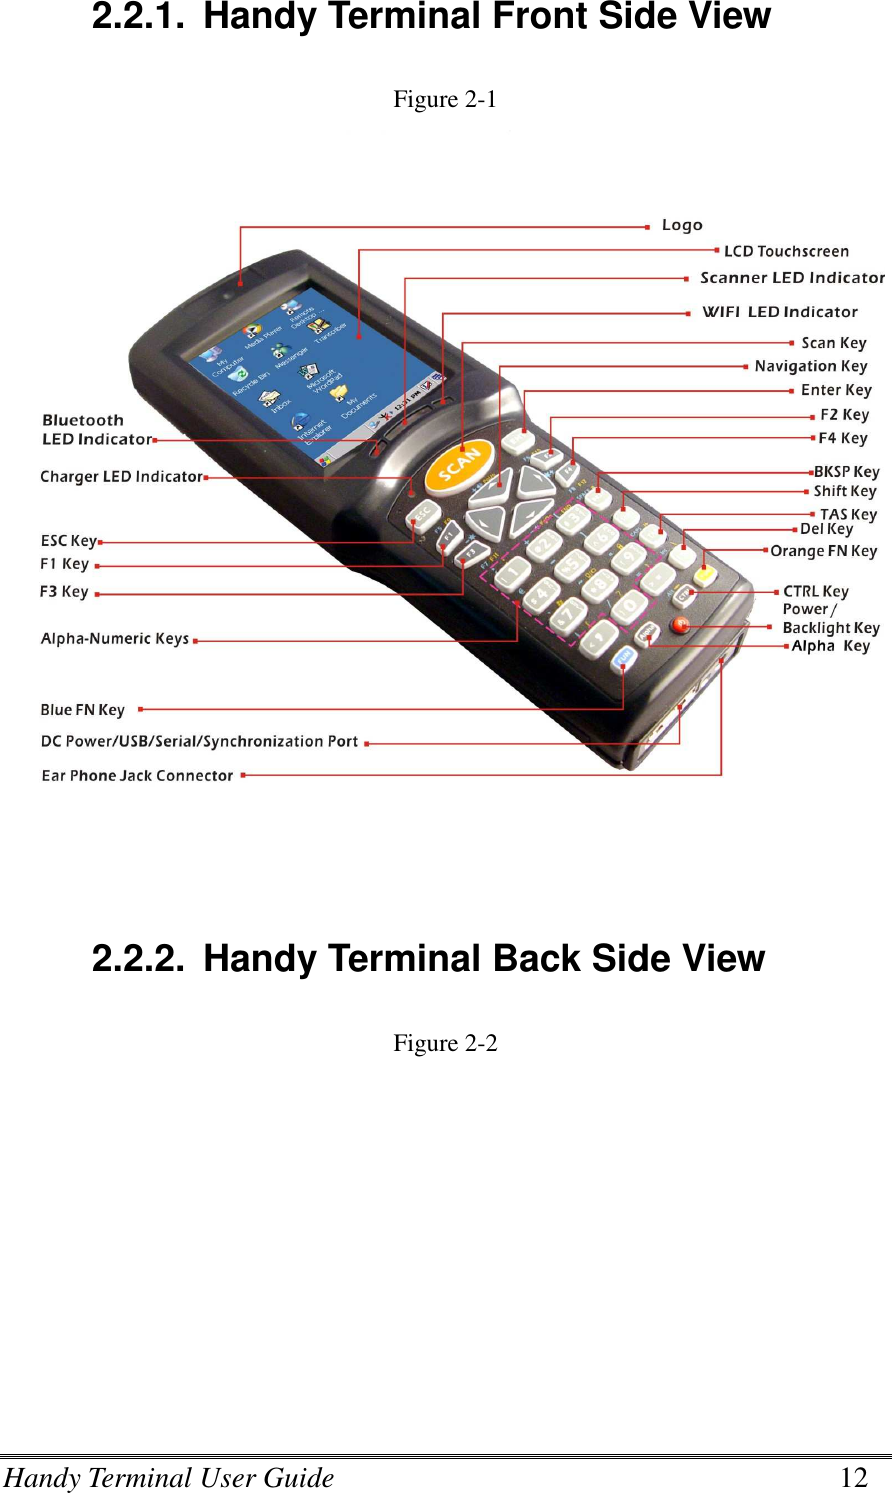 Handy Terminal User Guide      12 2.2.1.  Handy Terminal Front Side View Figure 2-1    2.2.2.  Handy Terminal Back Side View Figure 2-2 